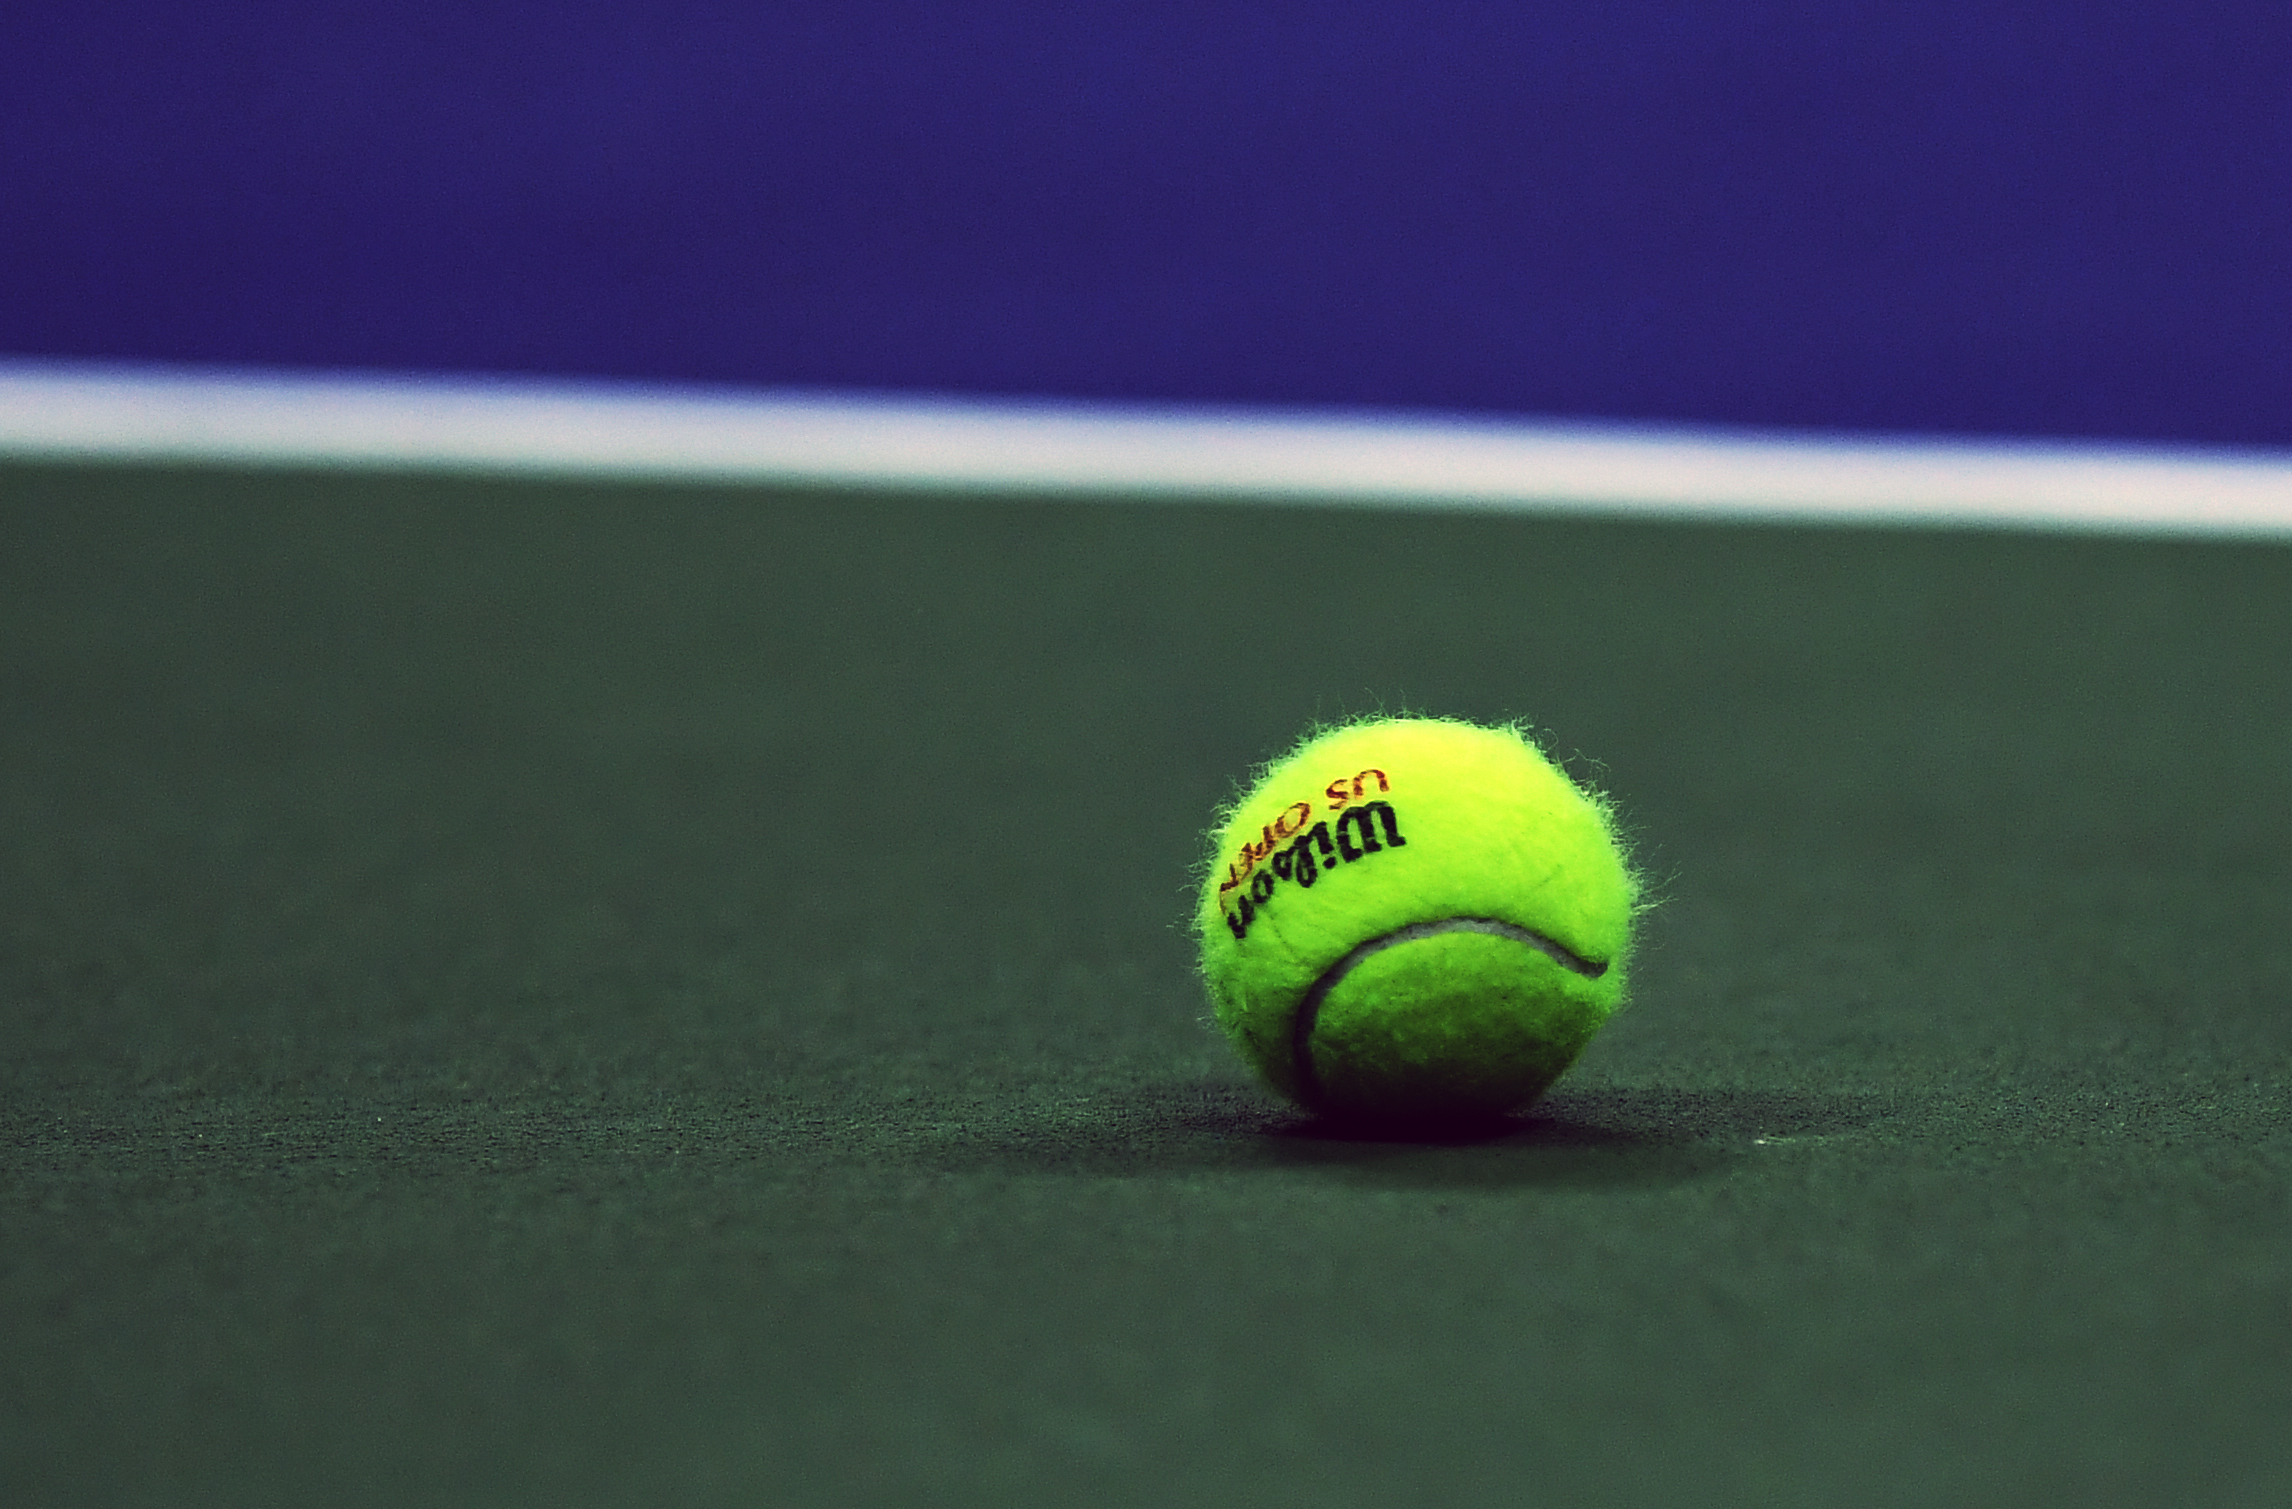 A Wilson tennis ball used at the US Open lying on the hard court.